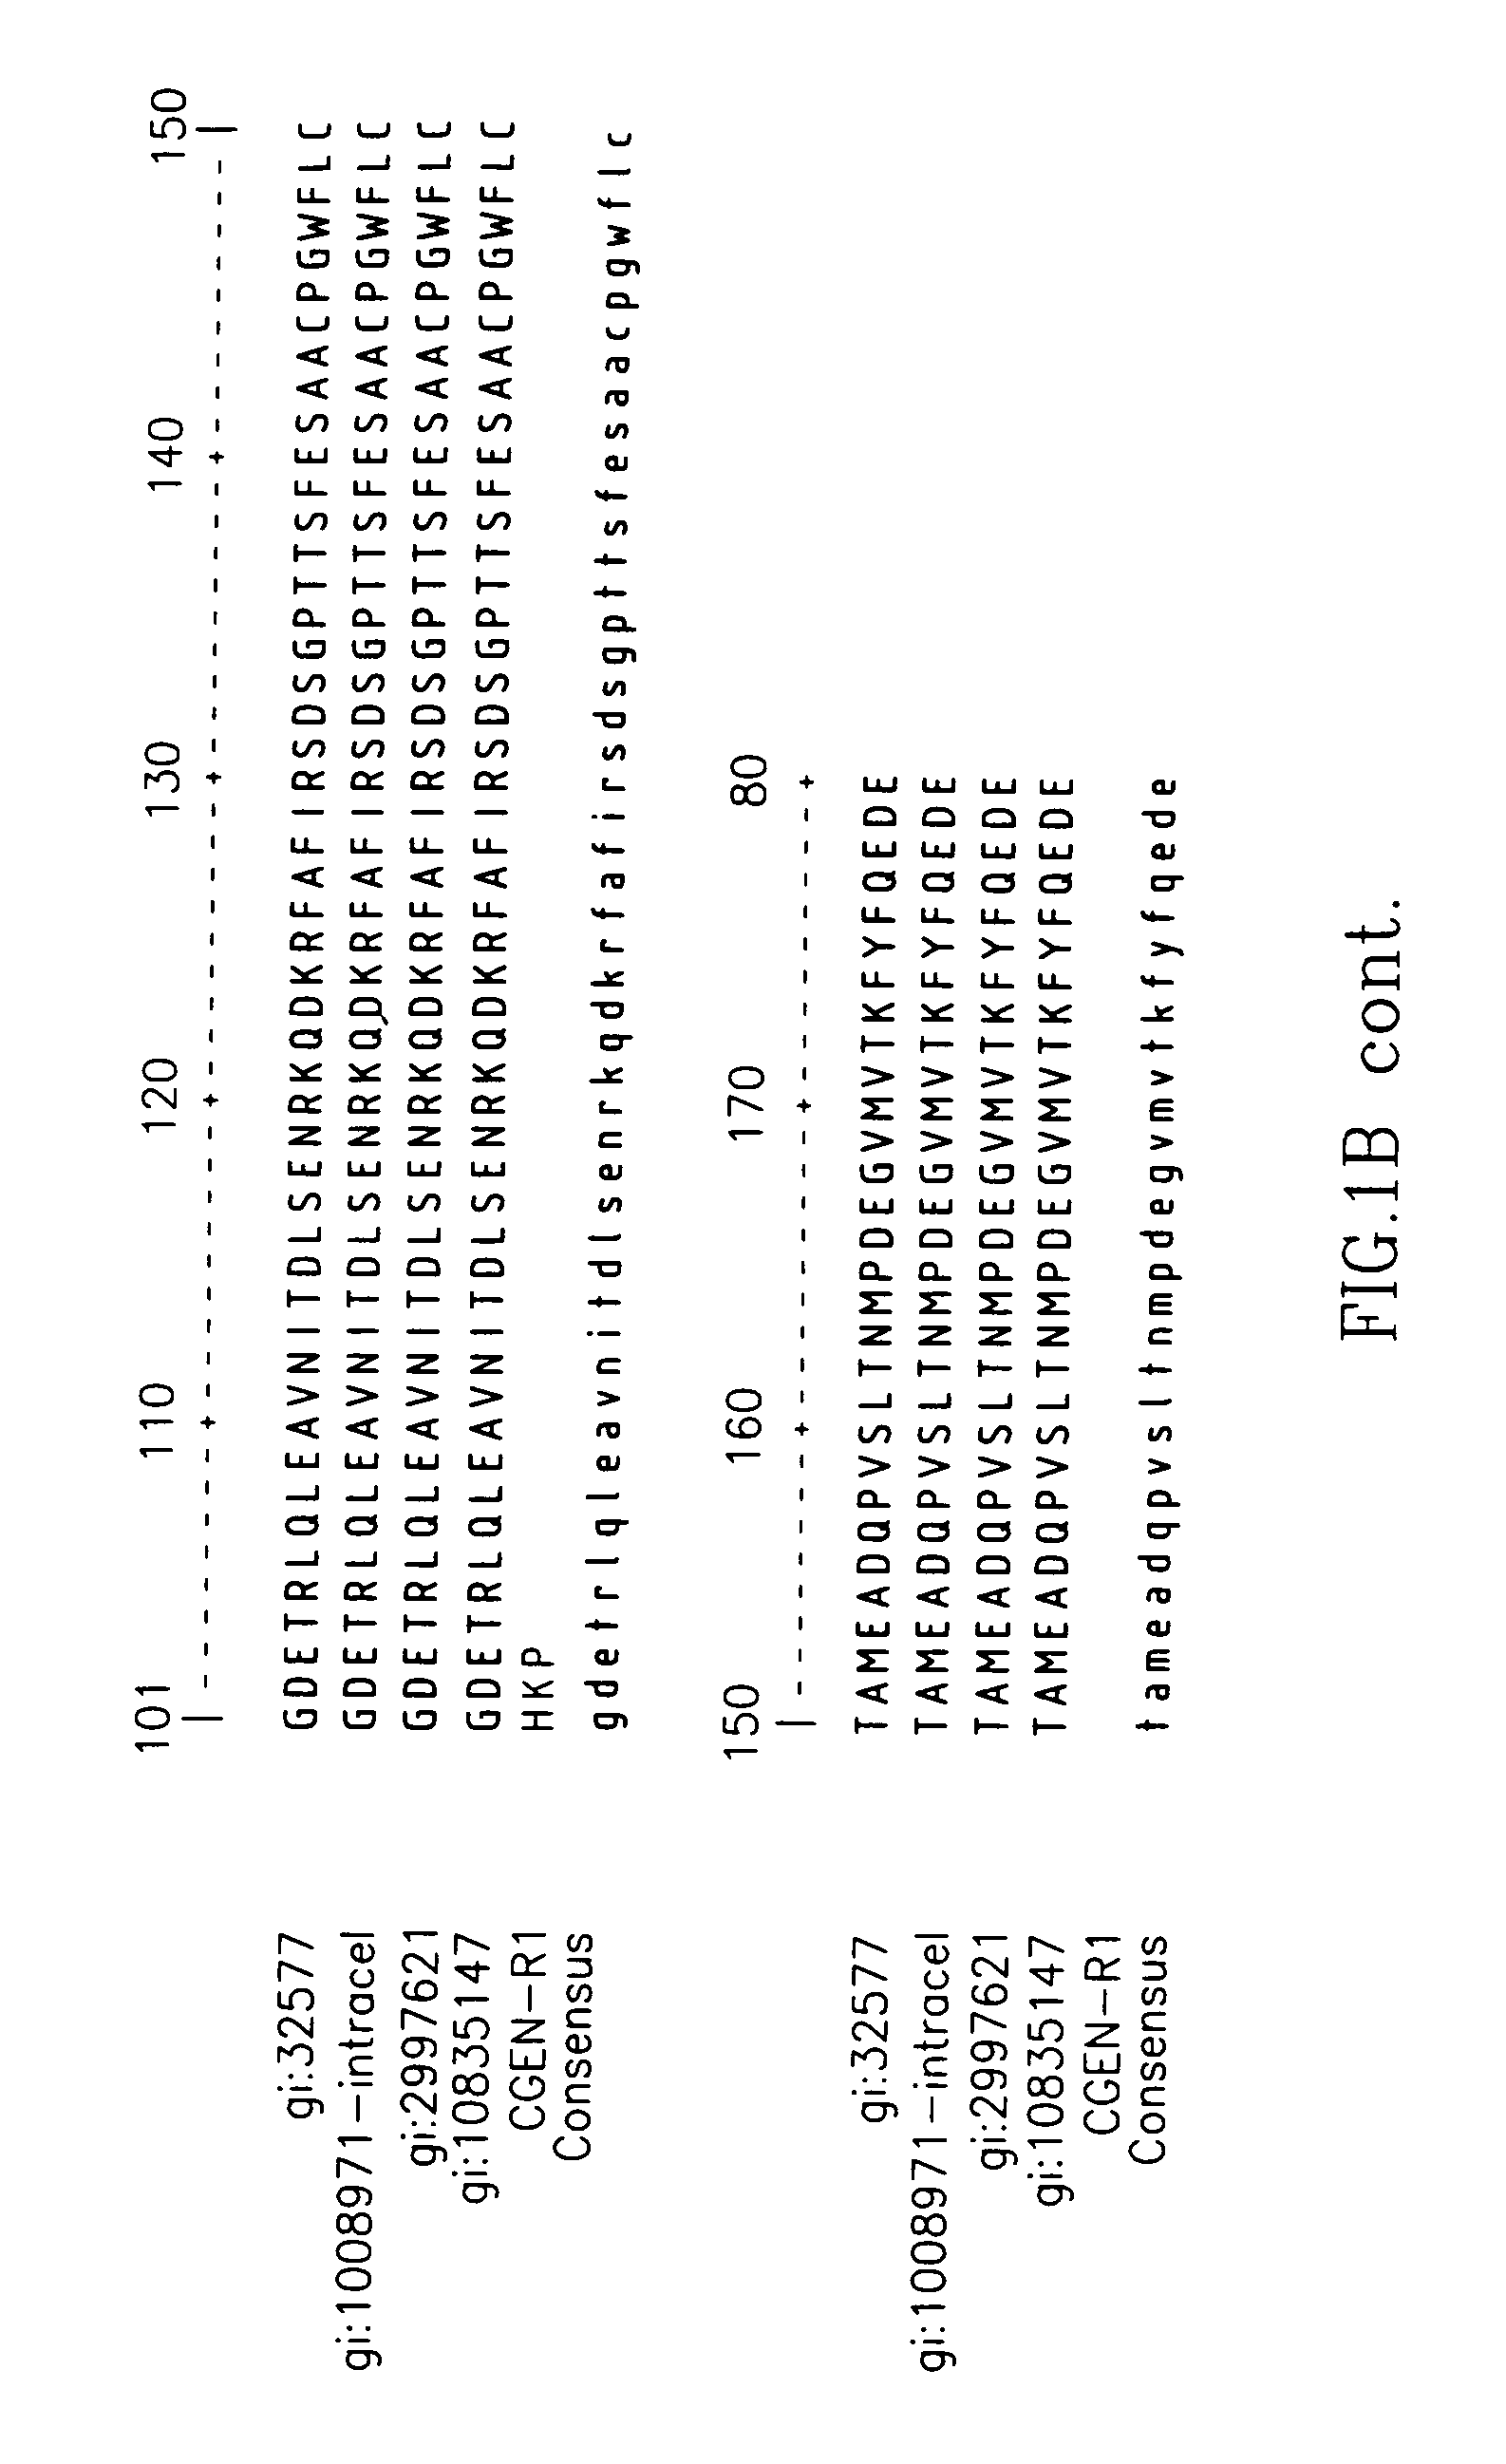 Variants of interleukin-1 receptor antagonist: compositions and uses thereof